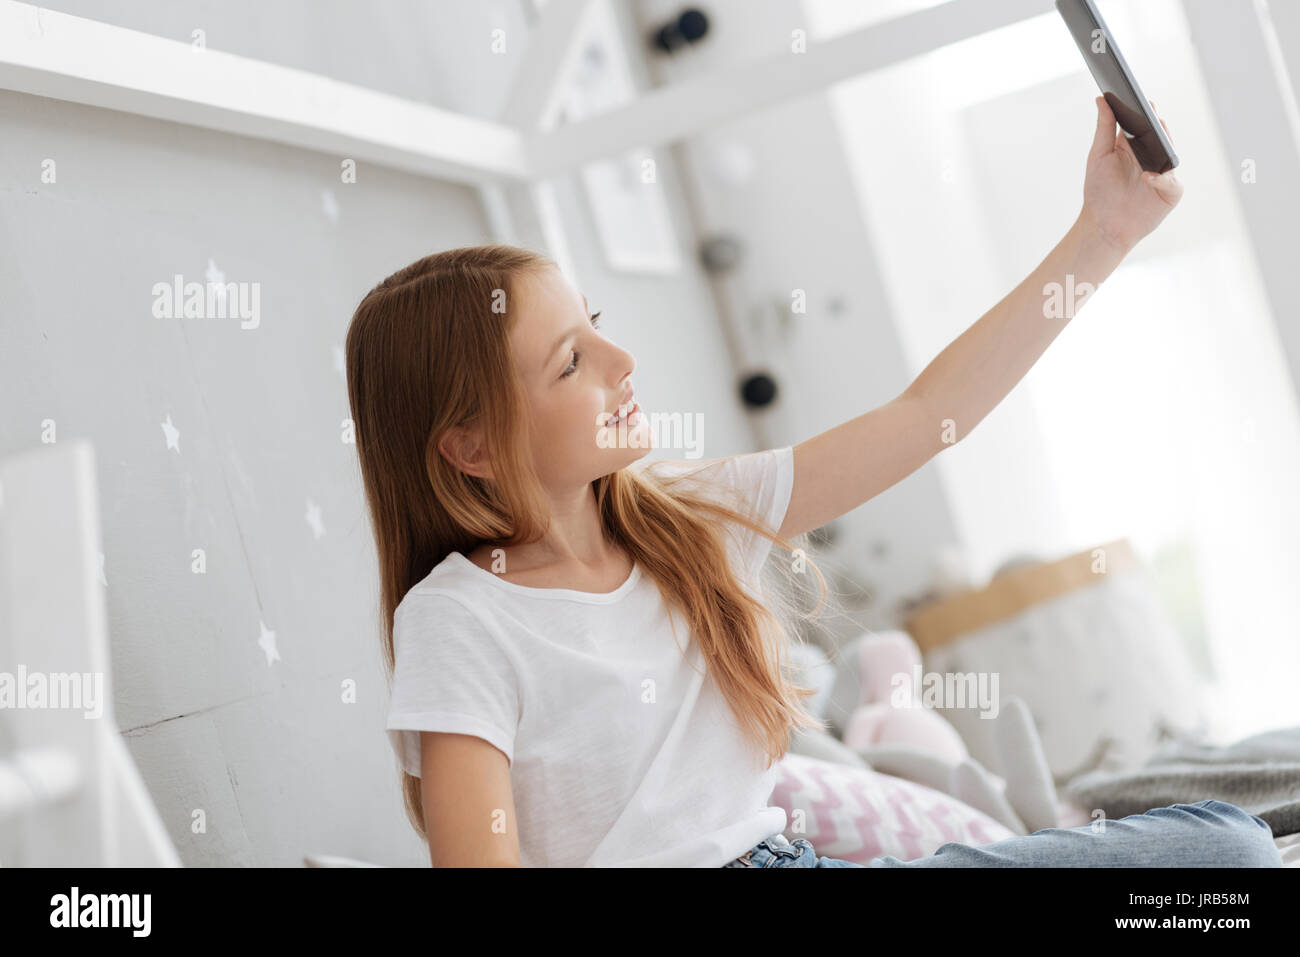 Child taking selfies at home Stock Photo